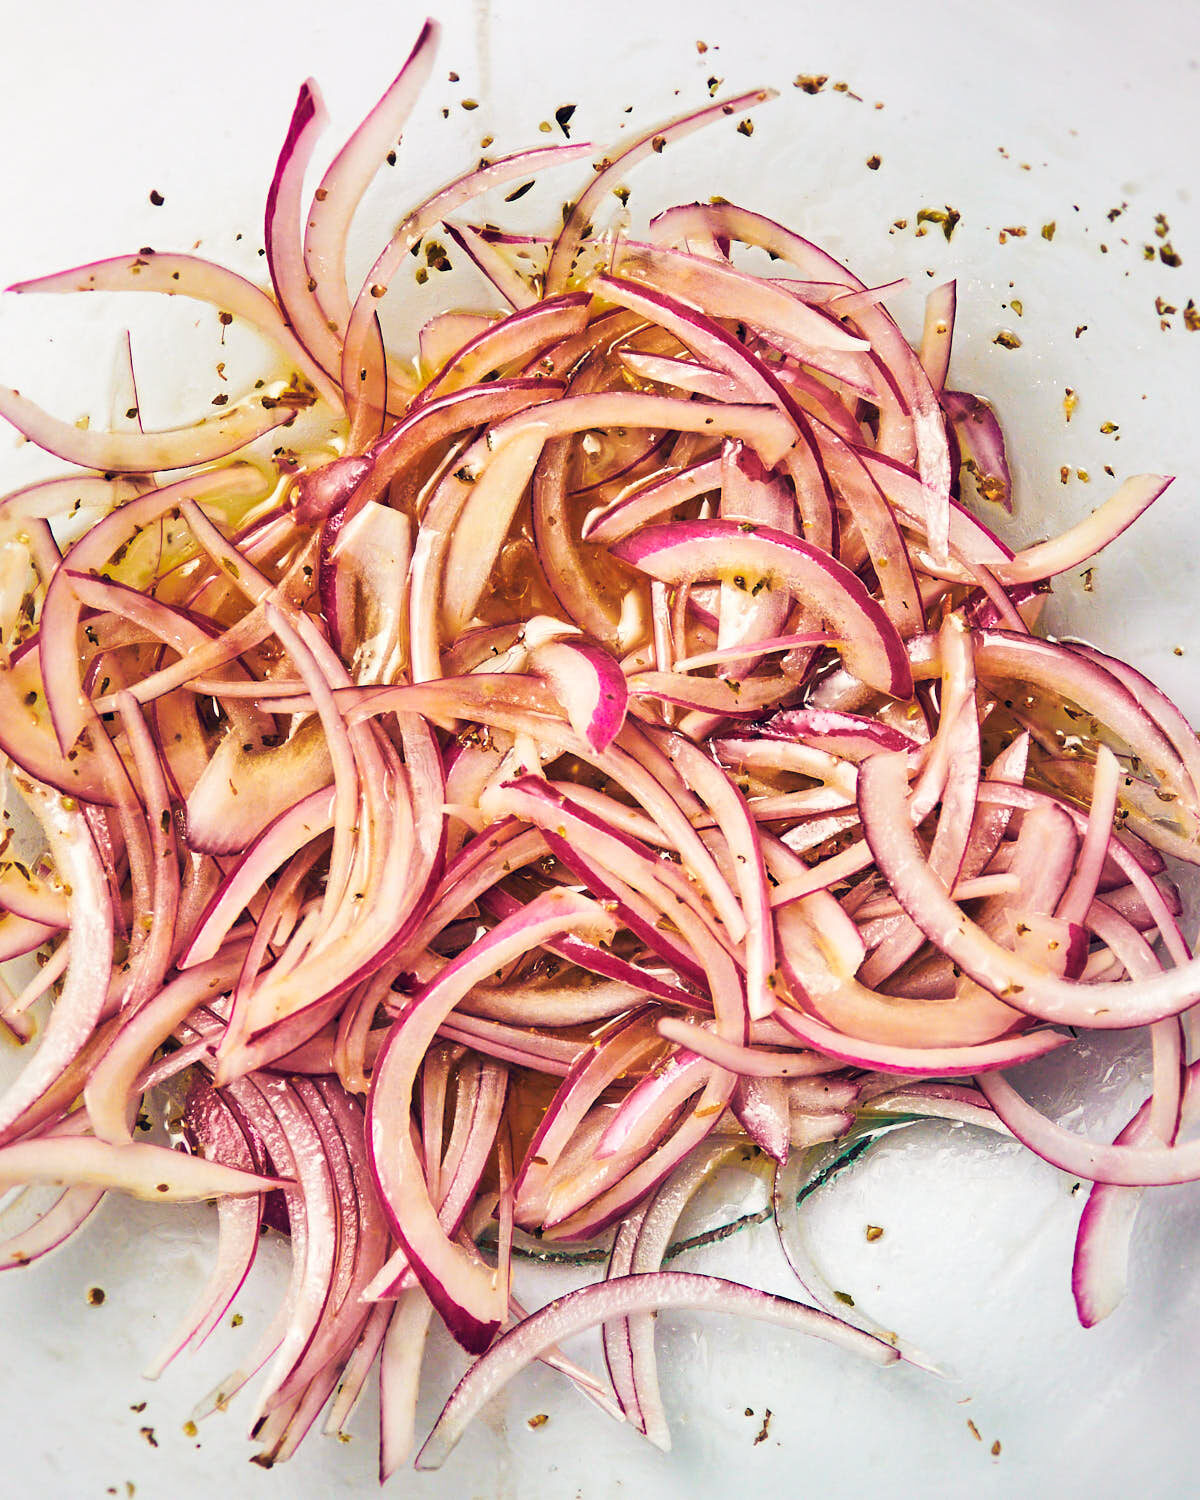 Thinly sliced red onions in a glass bowl of red wine vinegar for Greek Cucumber Salad.